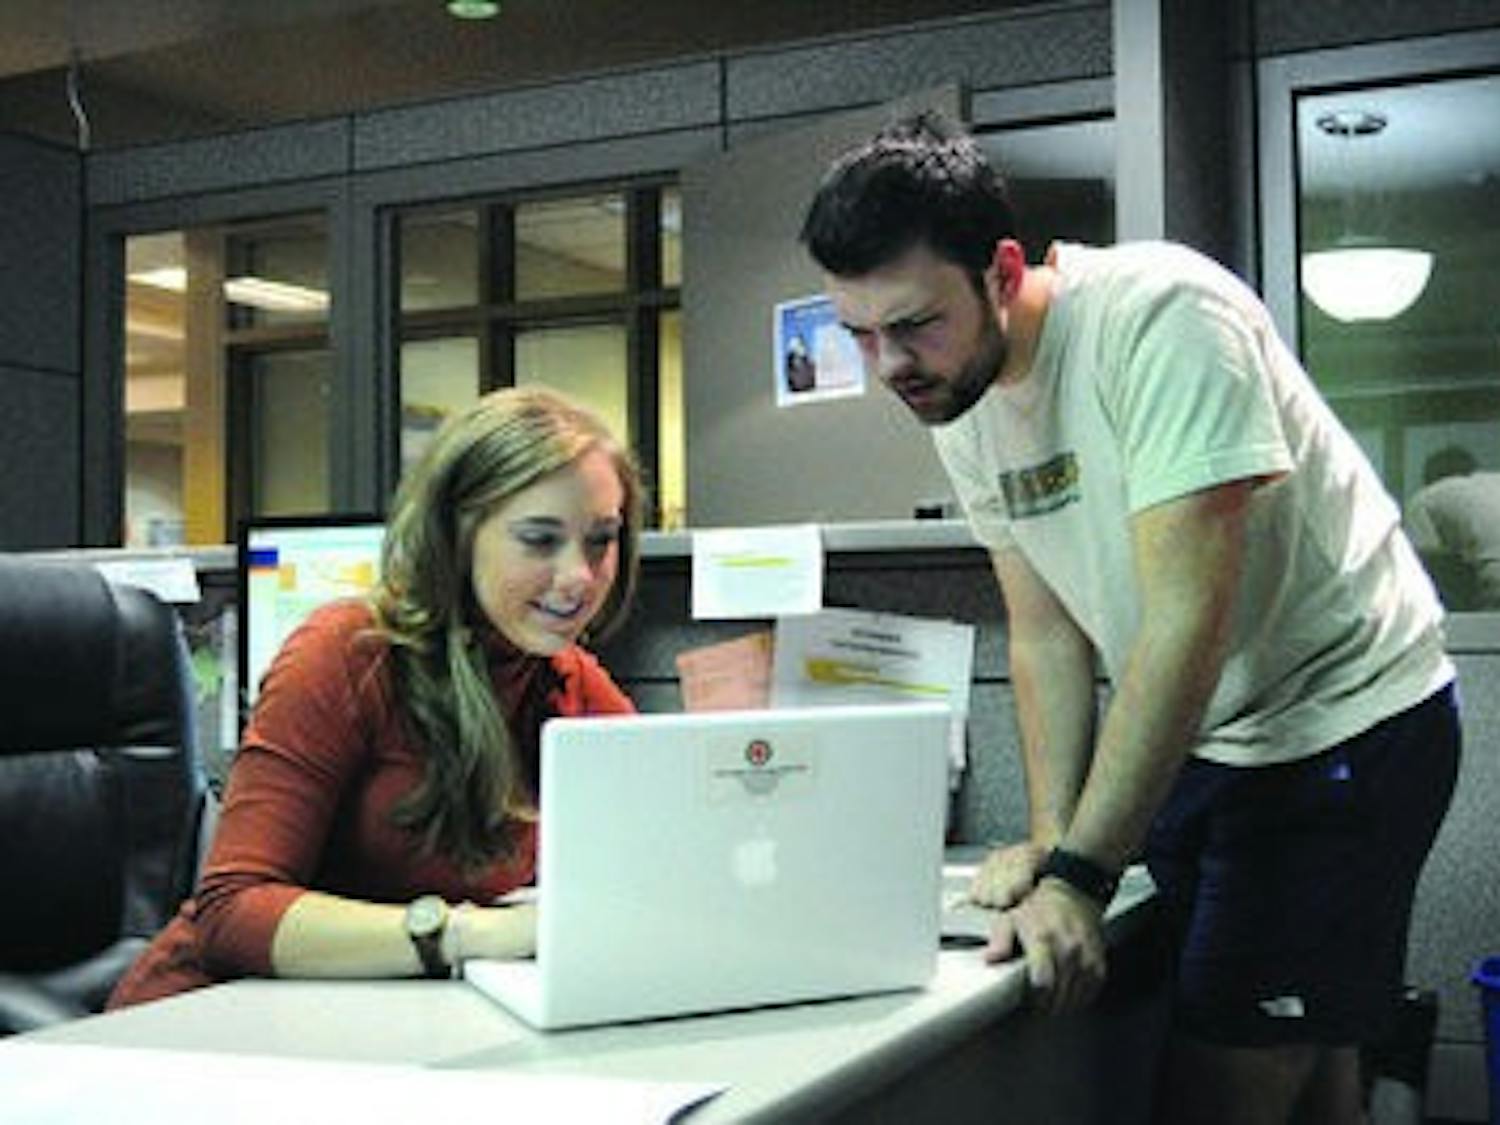 Allison Chandler, IT specialist, takes a look at the computer of Tyler Claxton, junior in forestry. (Christen Harned / ASSISTANT PHOTO EDITOR)